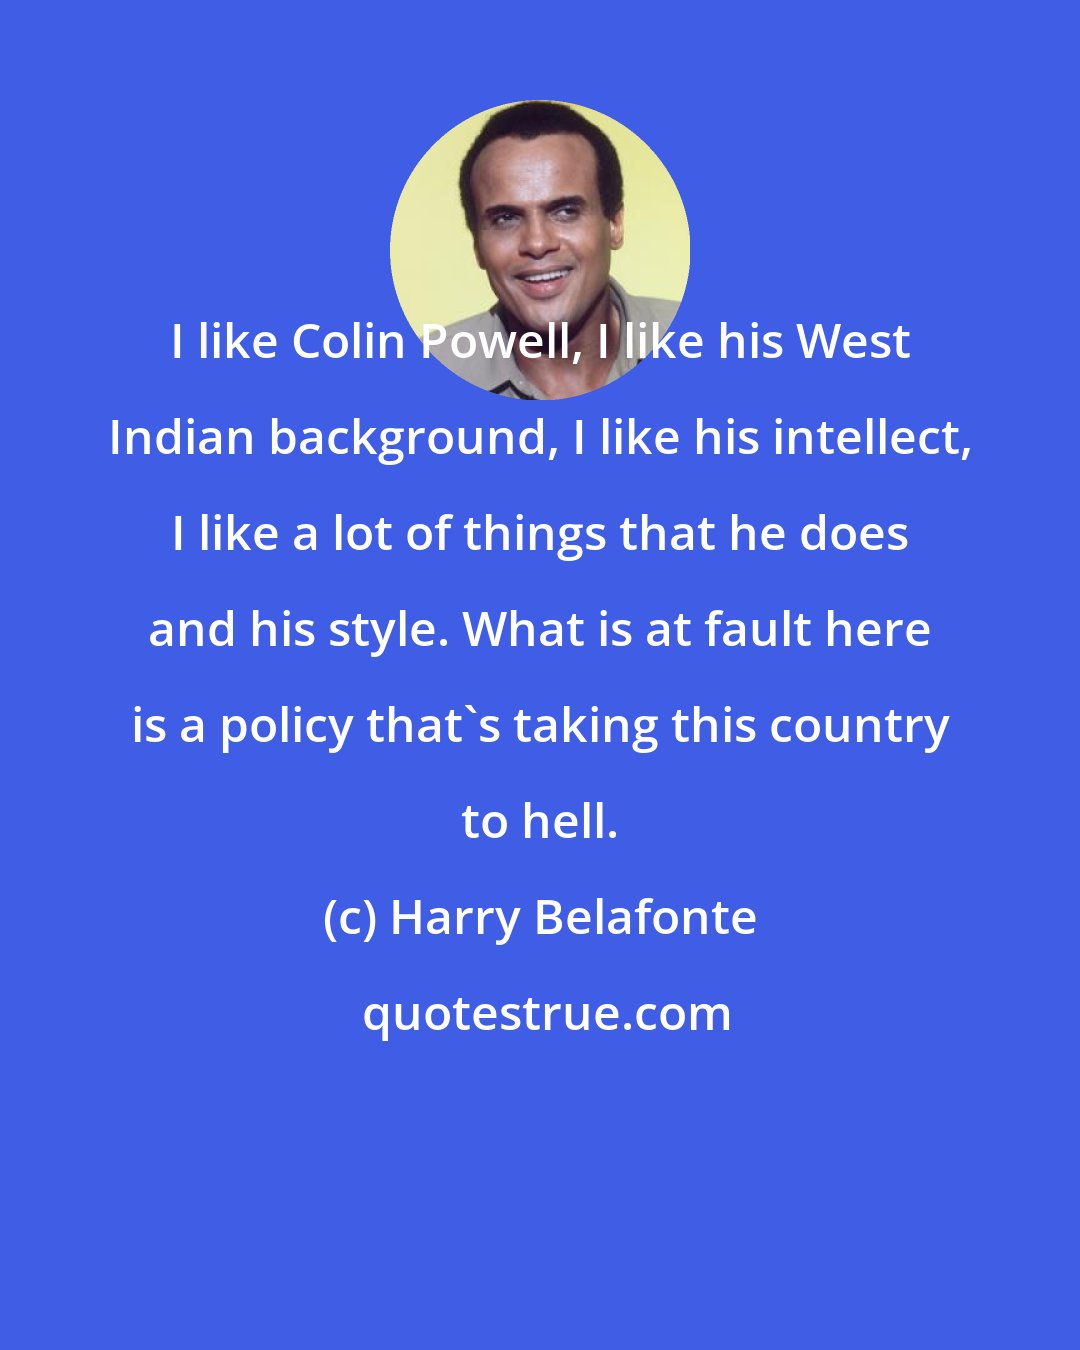 Harry Belafonte: I like Colin Powell, I like his West Indian background, I like his intellect, I like a lot of things that he does and his style. What is at fault here is a policy that's taking this country to hell.